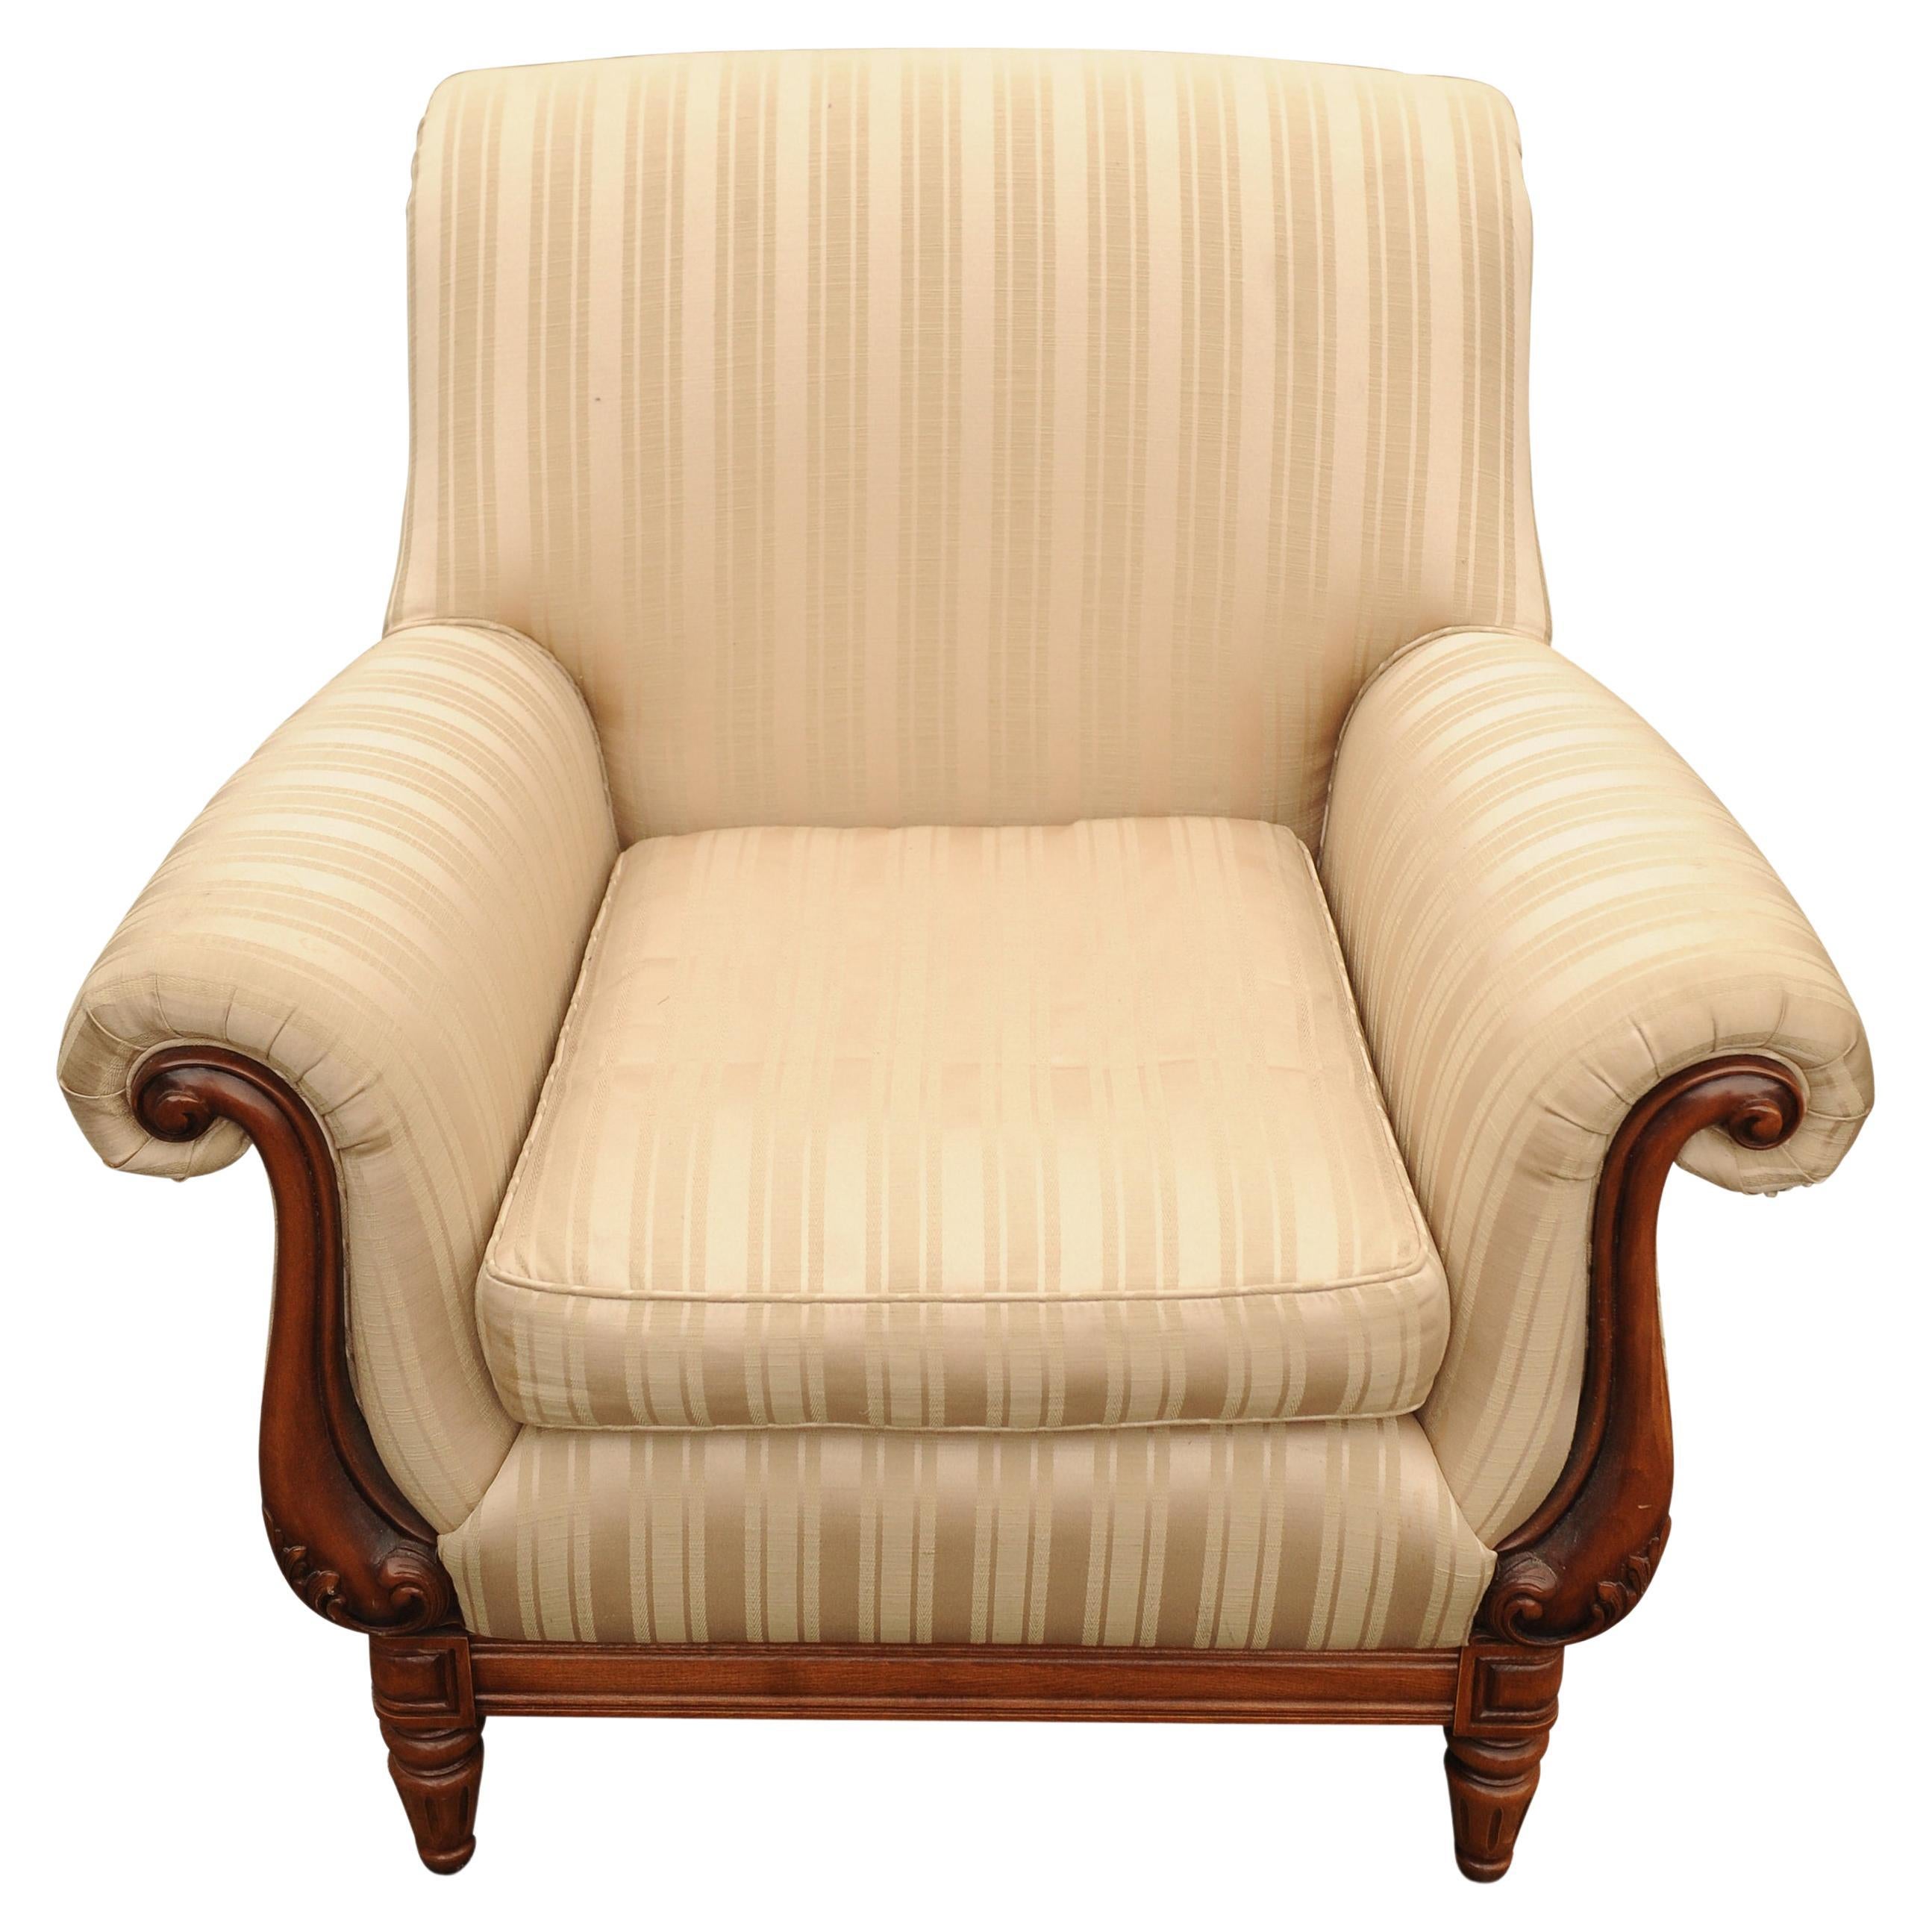 A William IV Empire Design Library Armchair Striped Cream Silk Upholstery